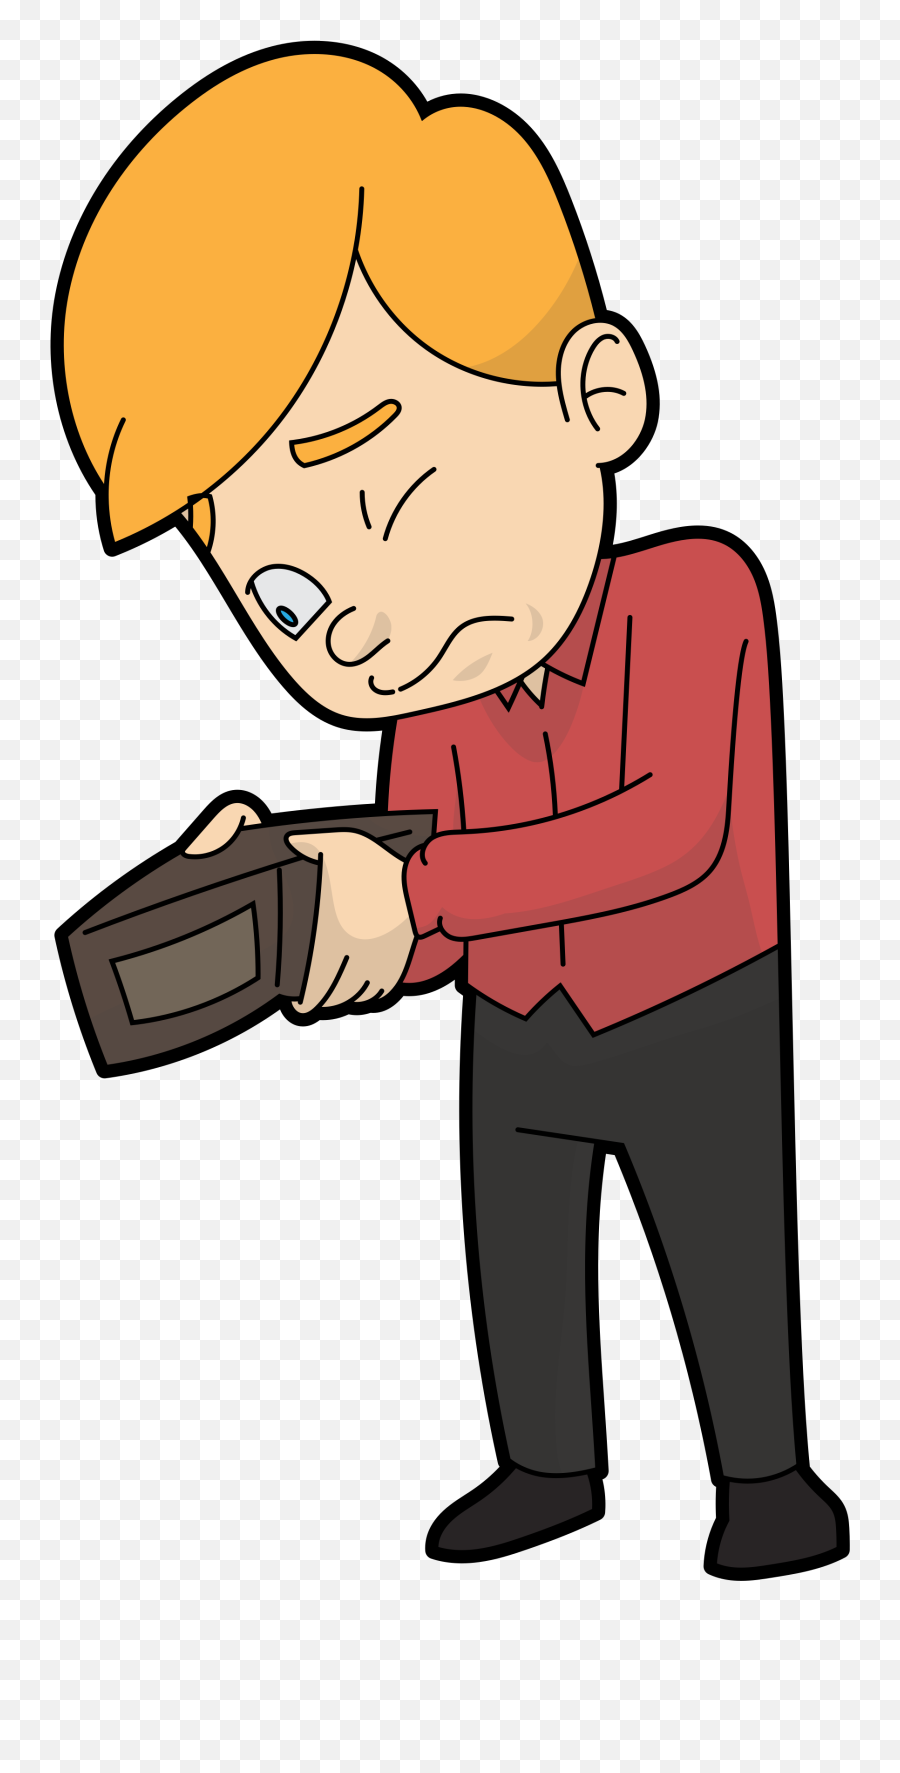 No Money Cartoon Png Free - Wanted To Do Panic Buying I Checked My Account I Can Only Panic,Money Clipart Transparent